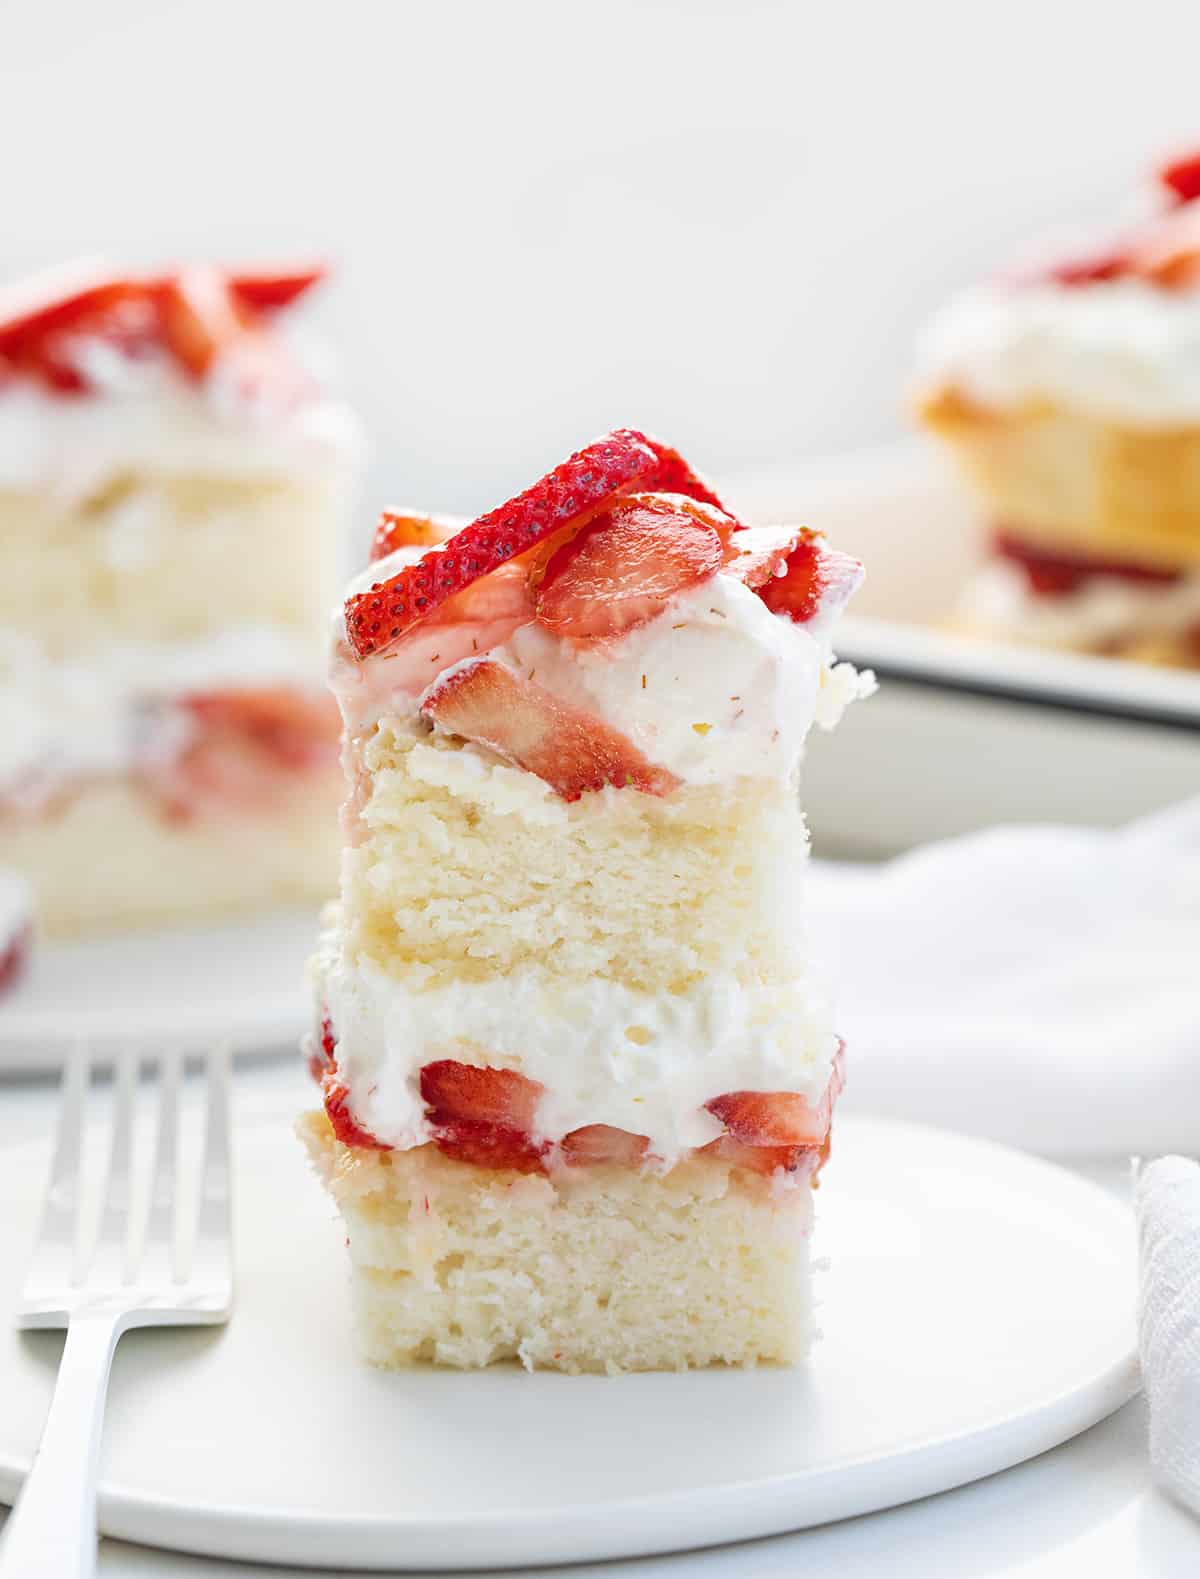 Slices of Sheet Pan Strawberry Shortcake on a White Counter with White Plates and Silverware.